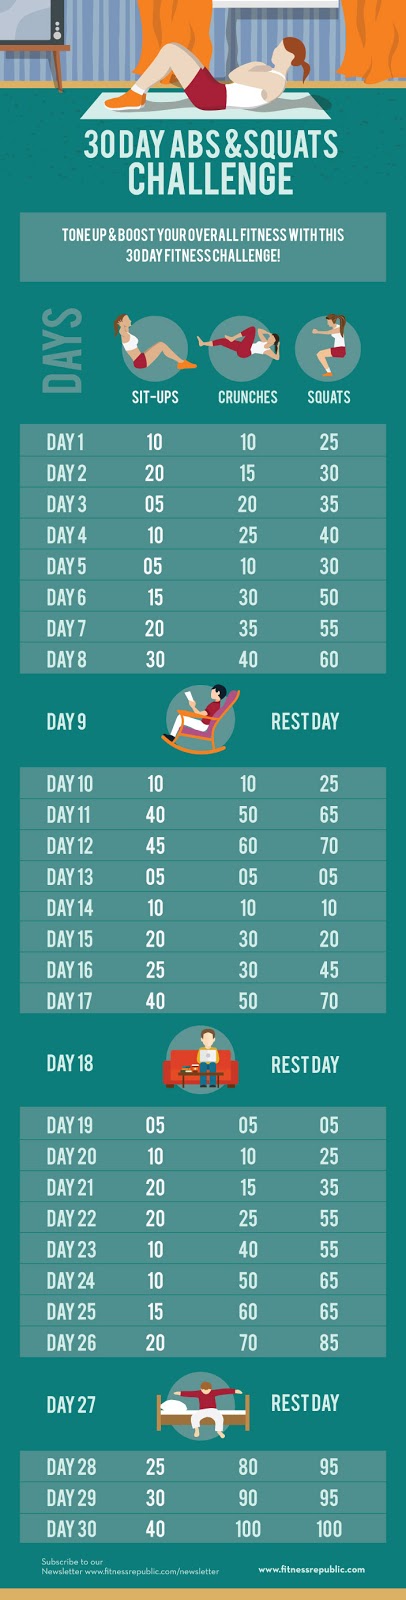 30 Day Abs And Squats Challenge | Top Health Remedies